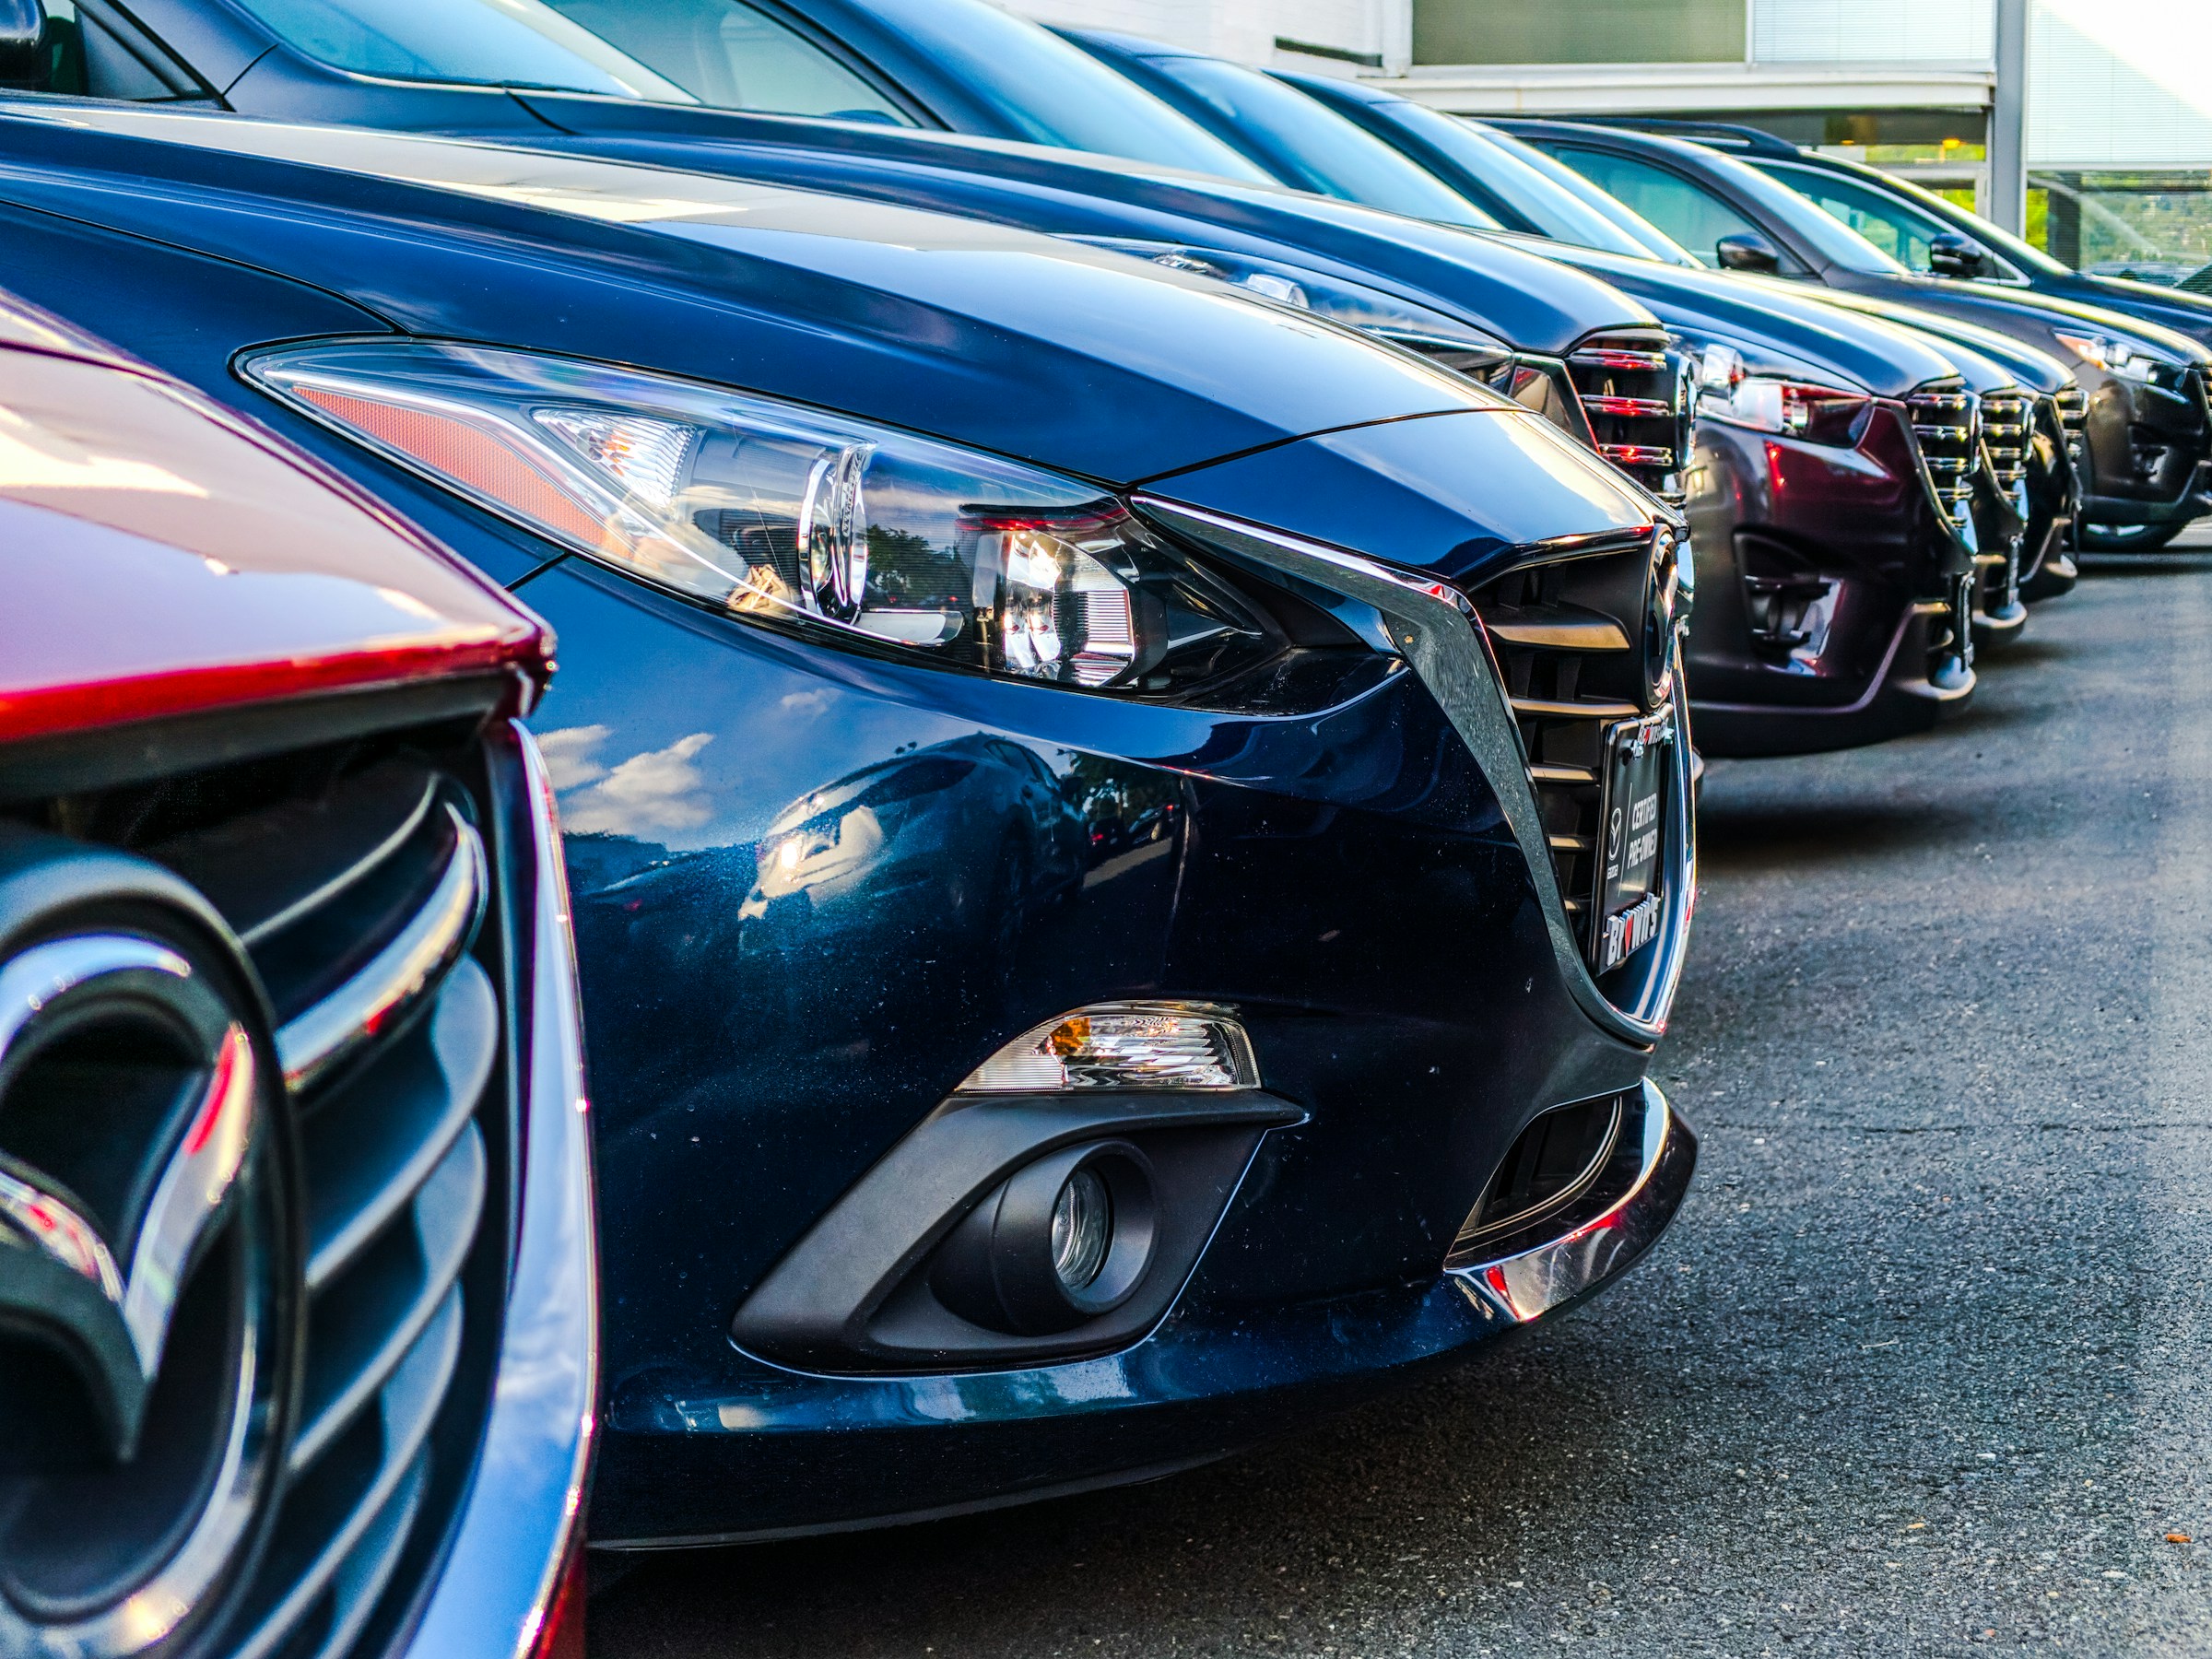 Image of several cars parked in a row.